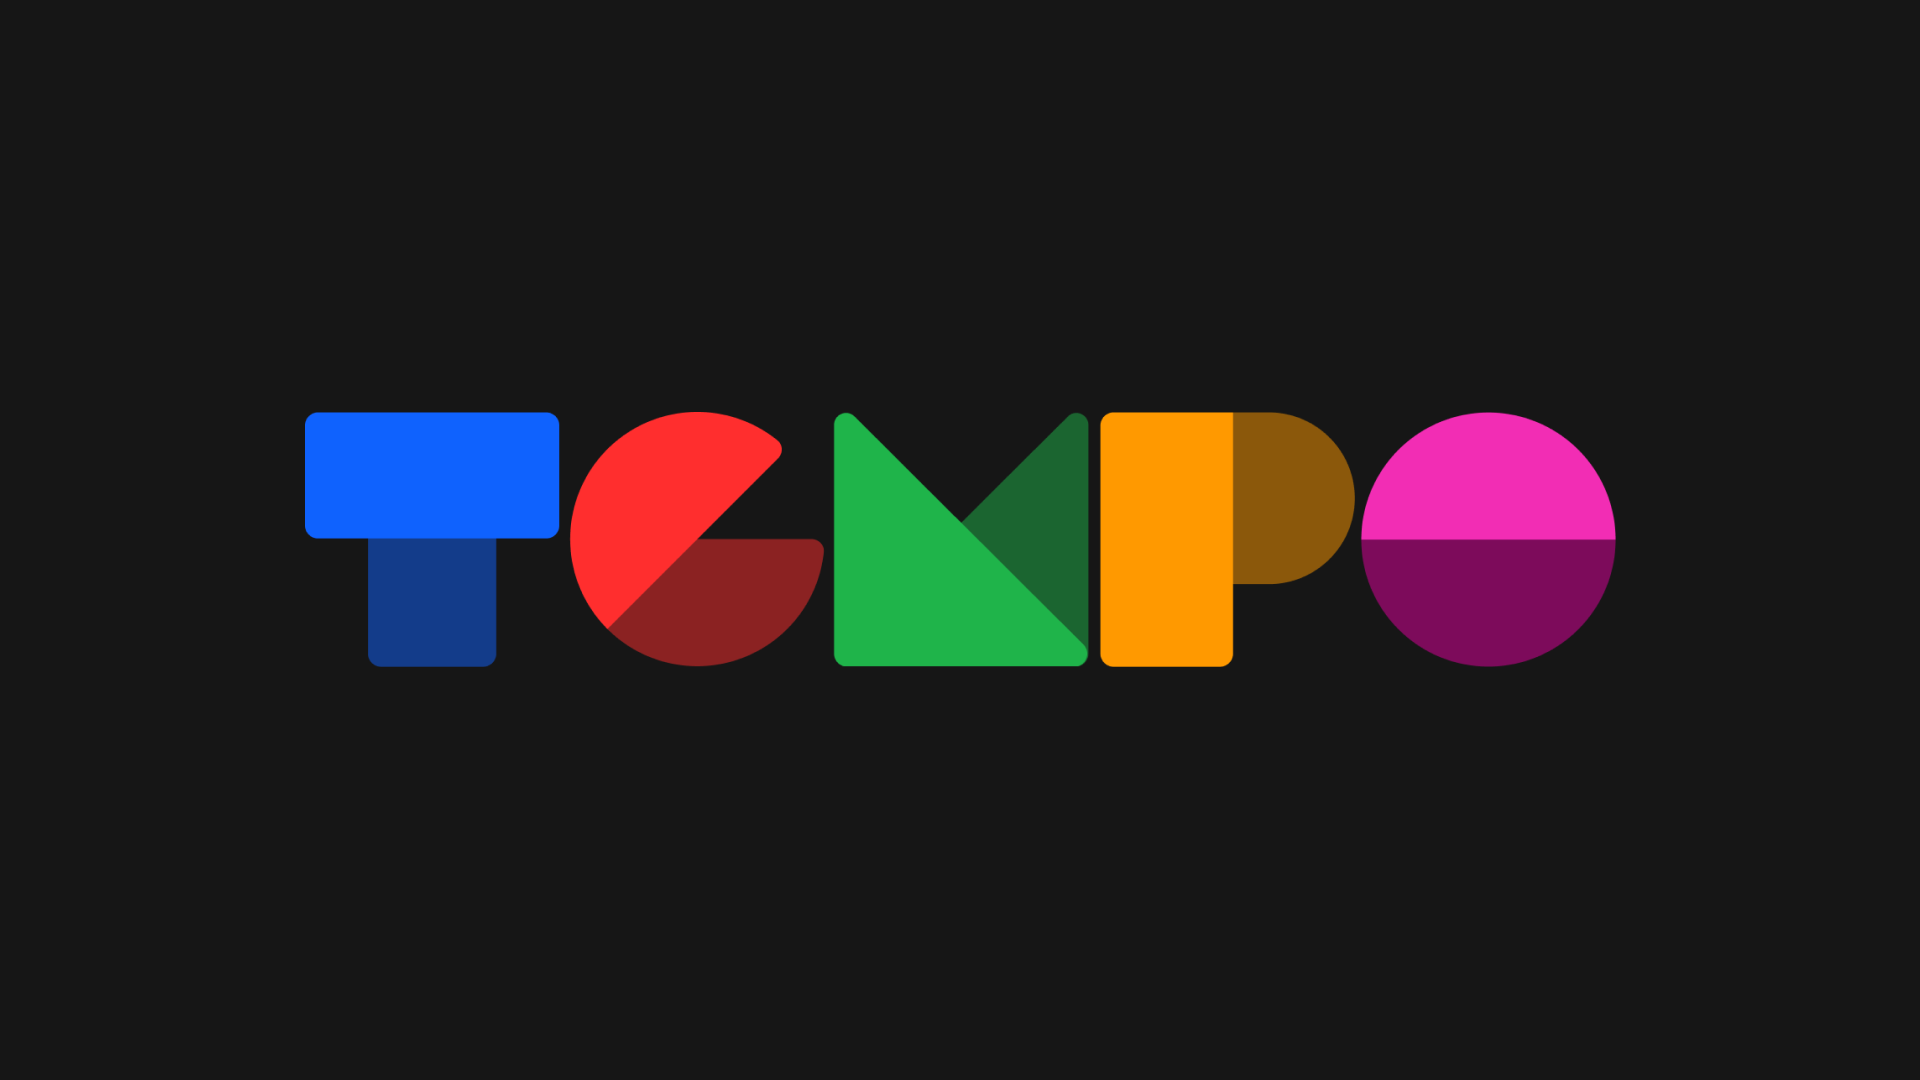 Introducing Tempo a studio by Clockwork